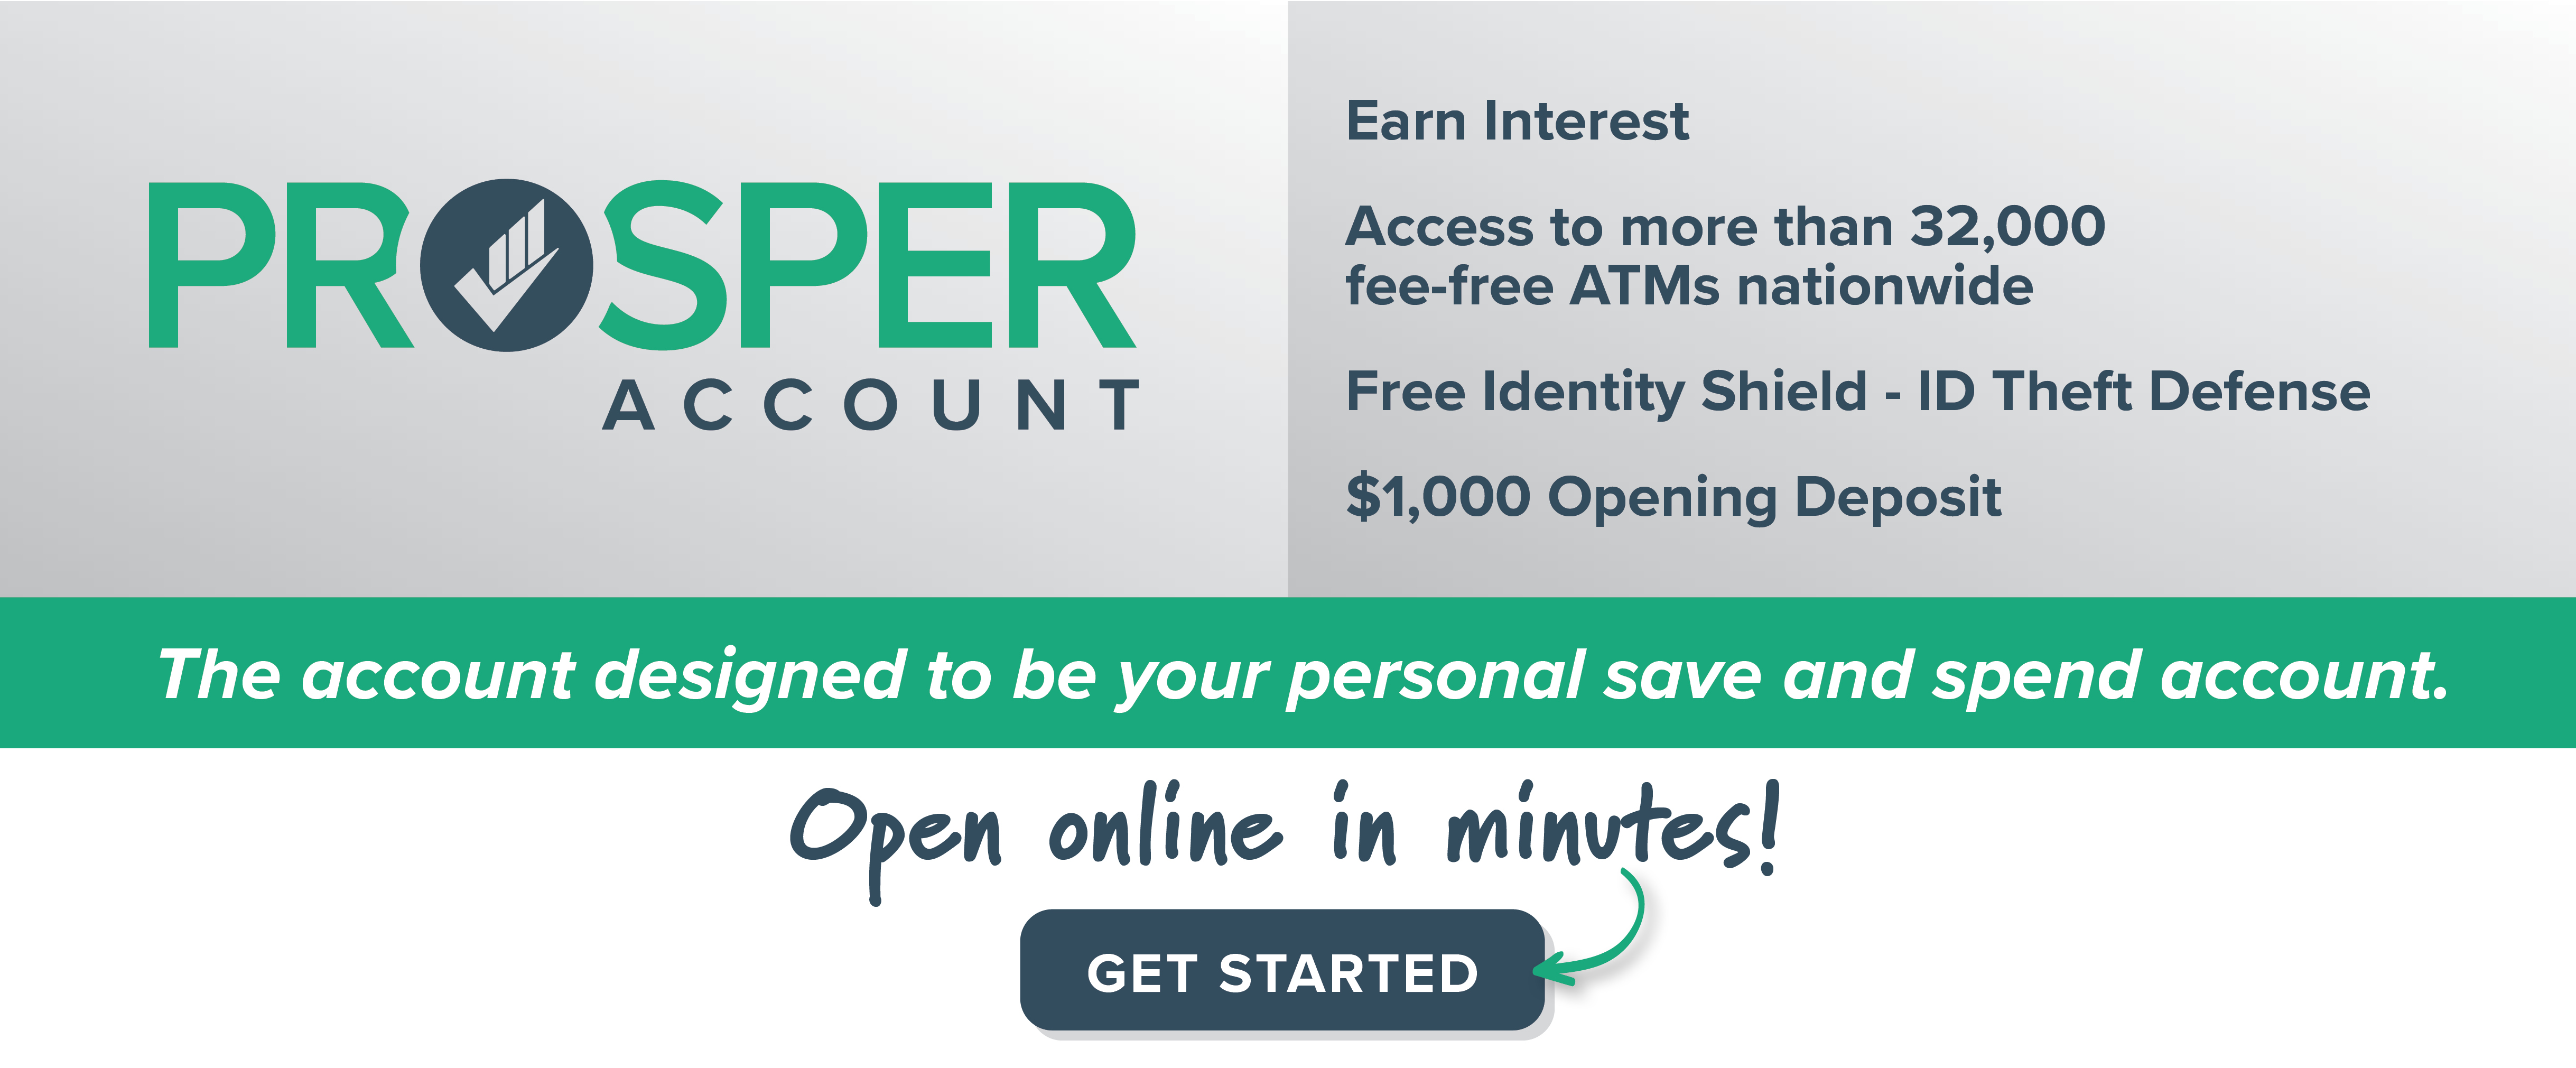 Prosper Account is designed to be your personal save & spend account. Click here to get started.